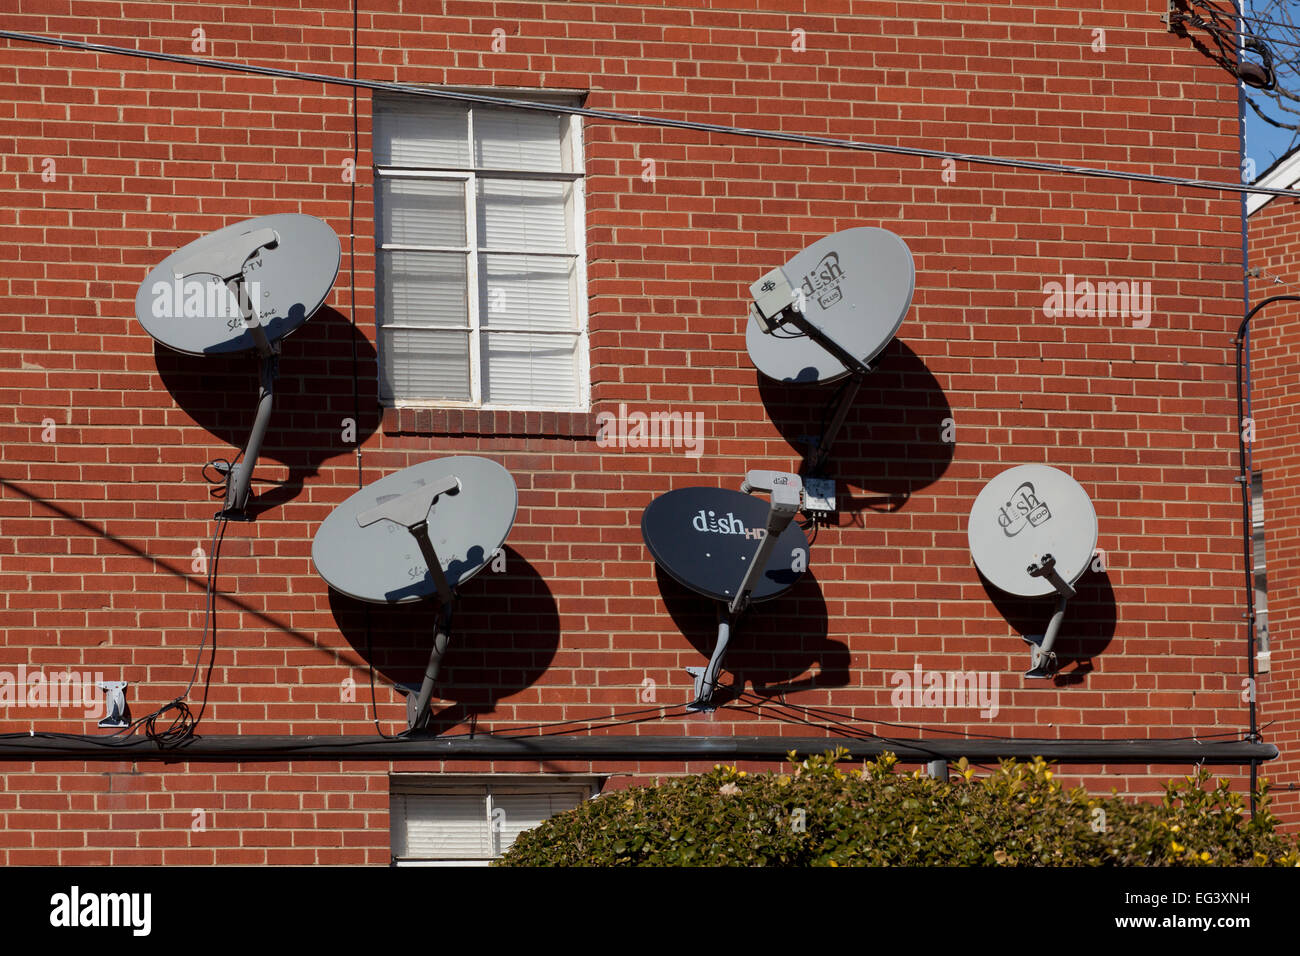 TV satellite dishes mounted on exterior of apartment building - Virginia USA Stock Photo